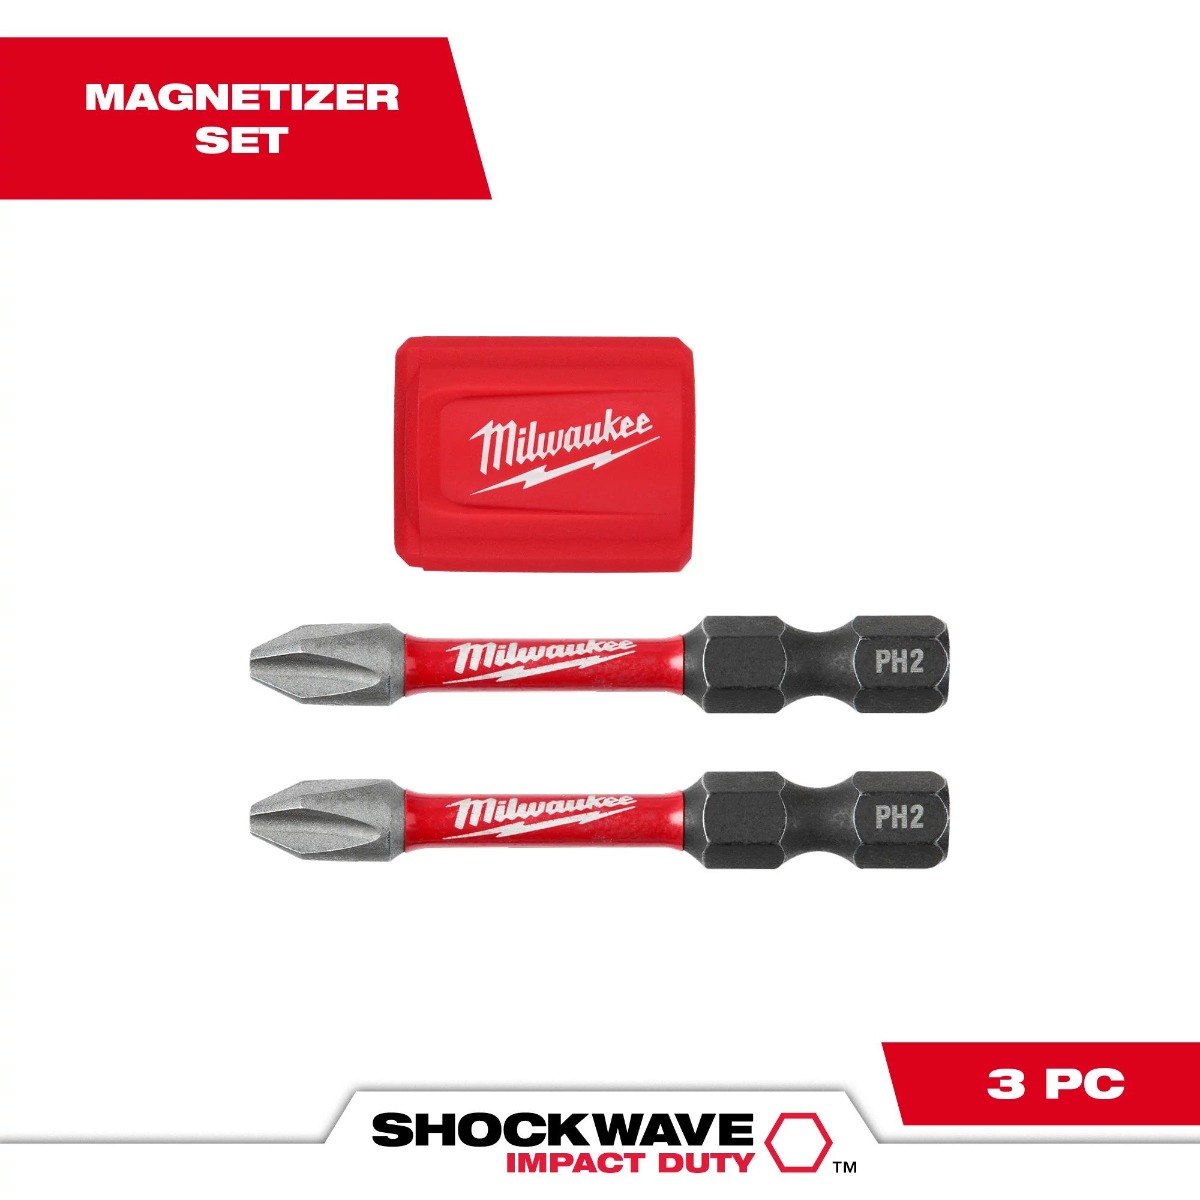 SHOCKWAVE Impact Duty™ Magnetic Attachment and PH2 Bit Set - 3PC